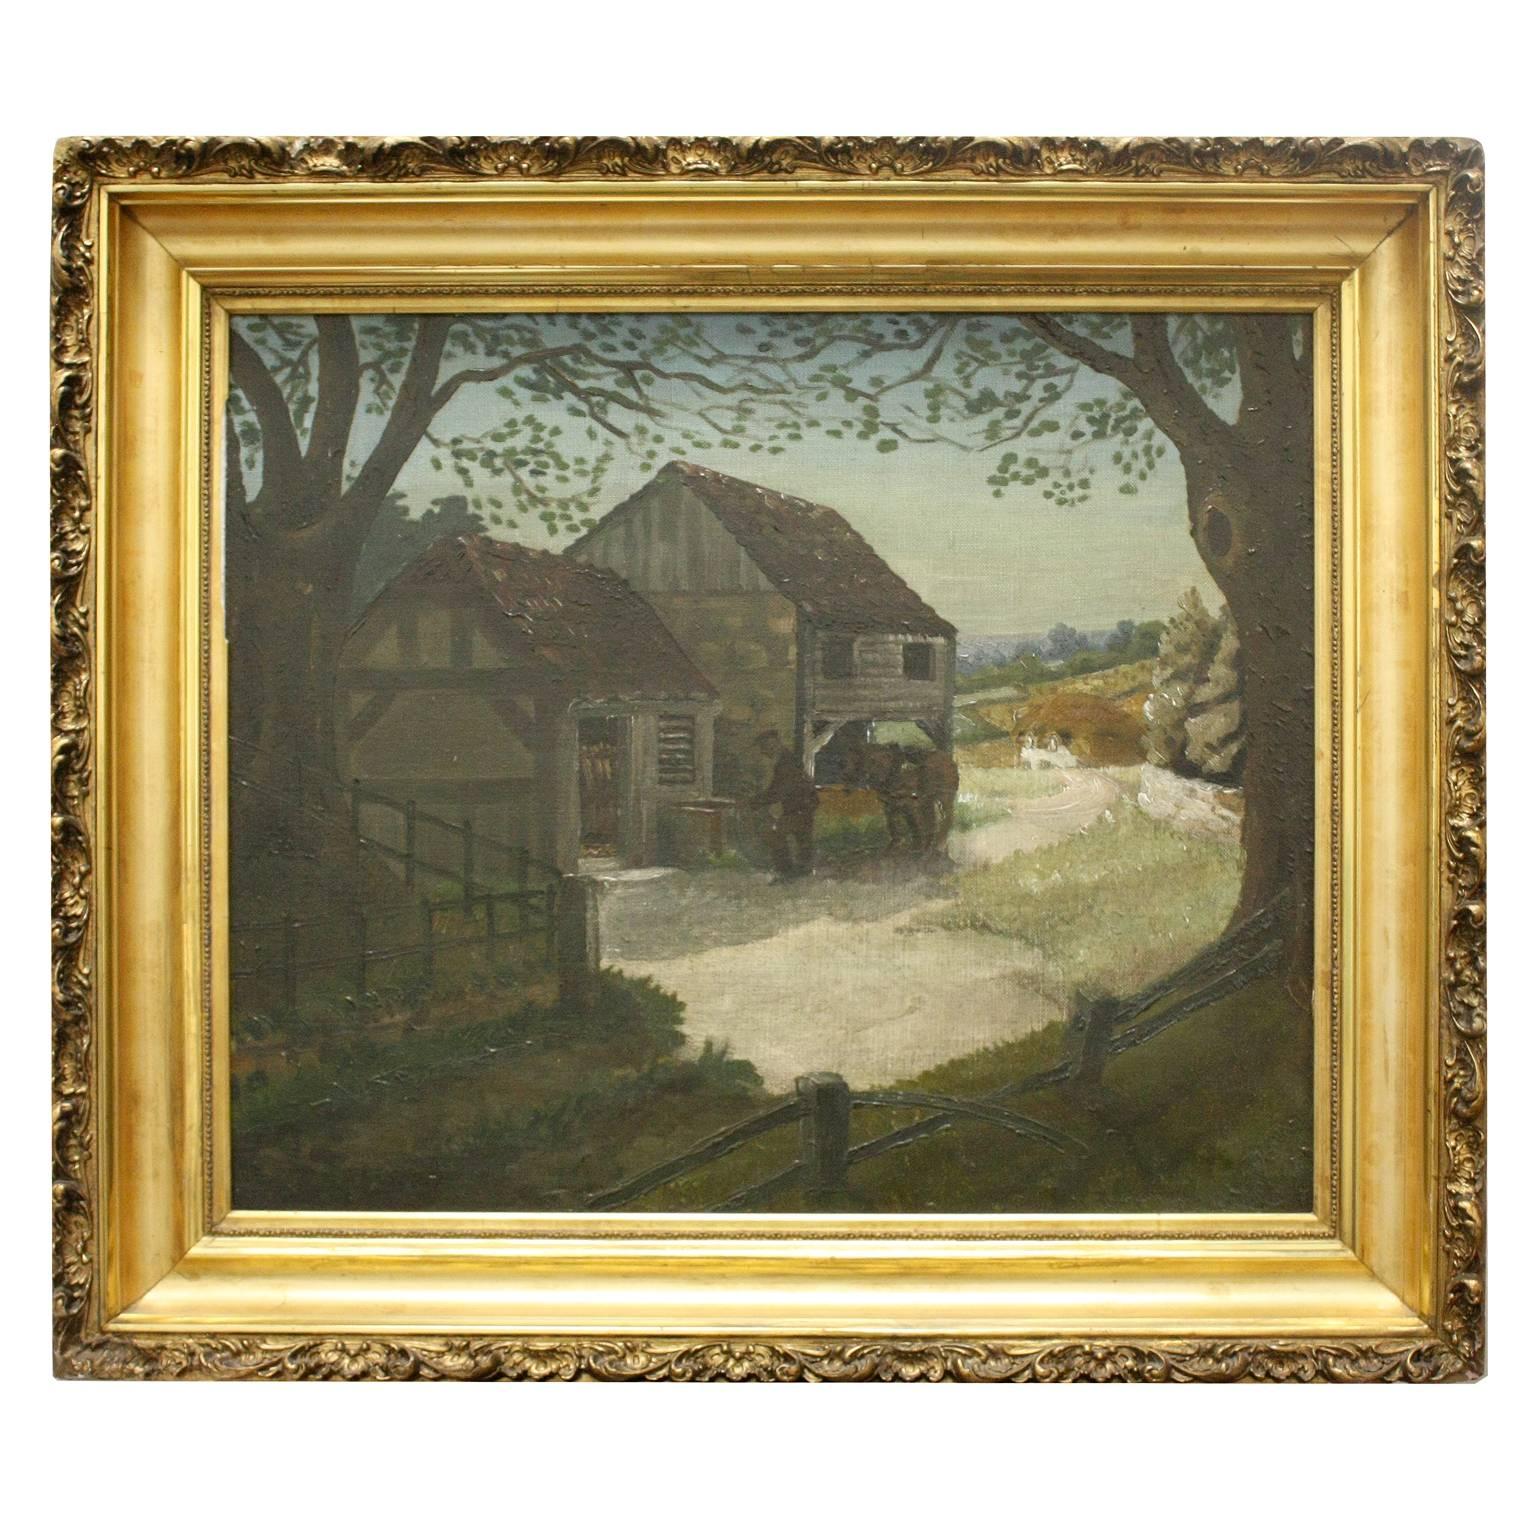 19C English Painting Man with a Horse / Barnyard Scene